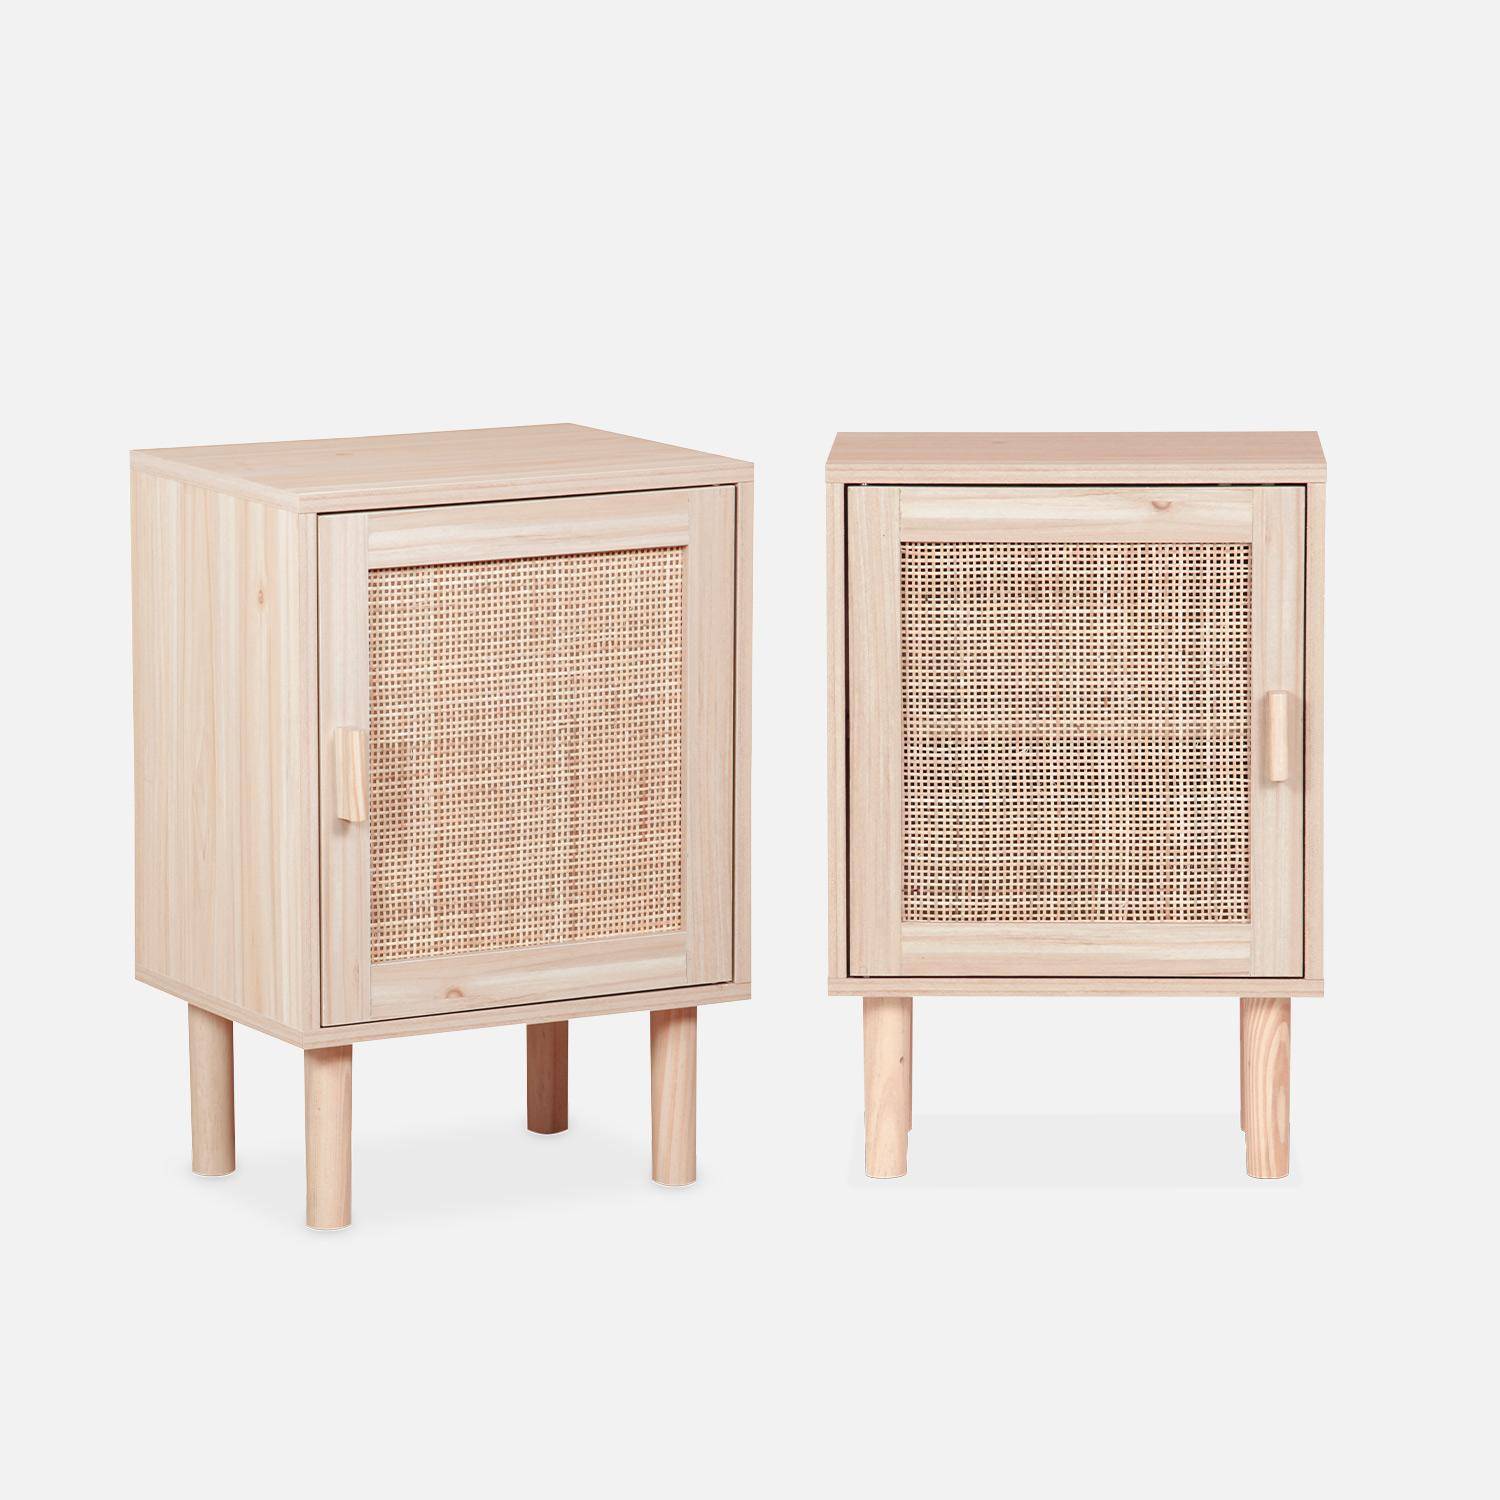 Pair of woven rattan 1-door bedside tables, 40x30x58cm - Camargue - Natural Photo4